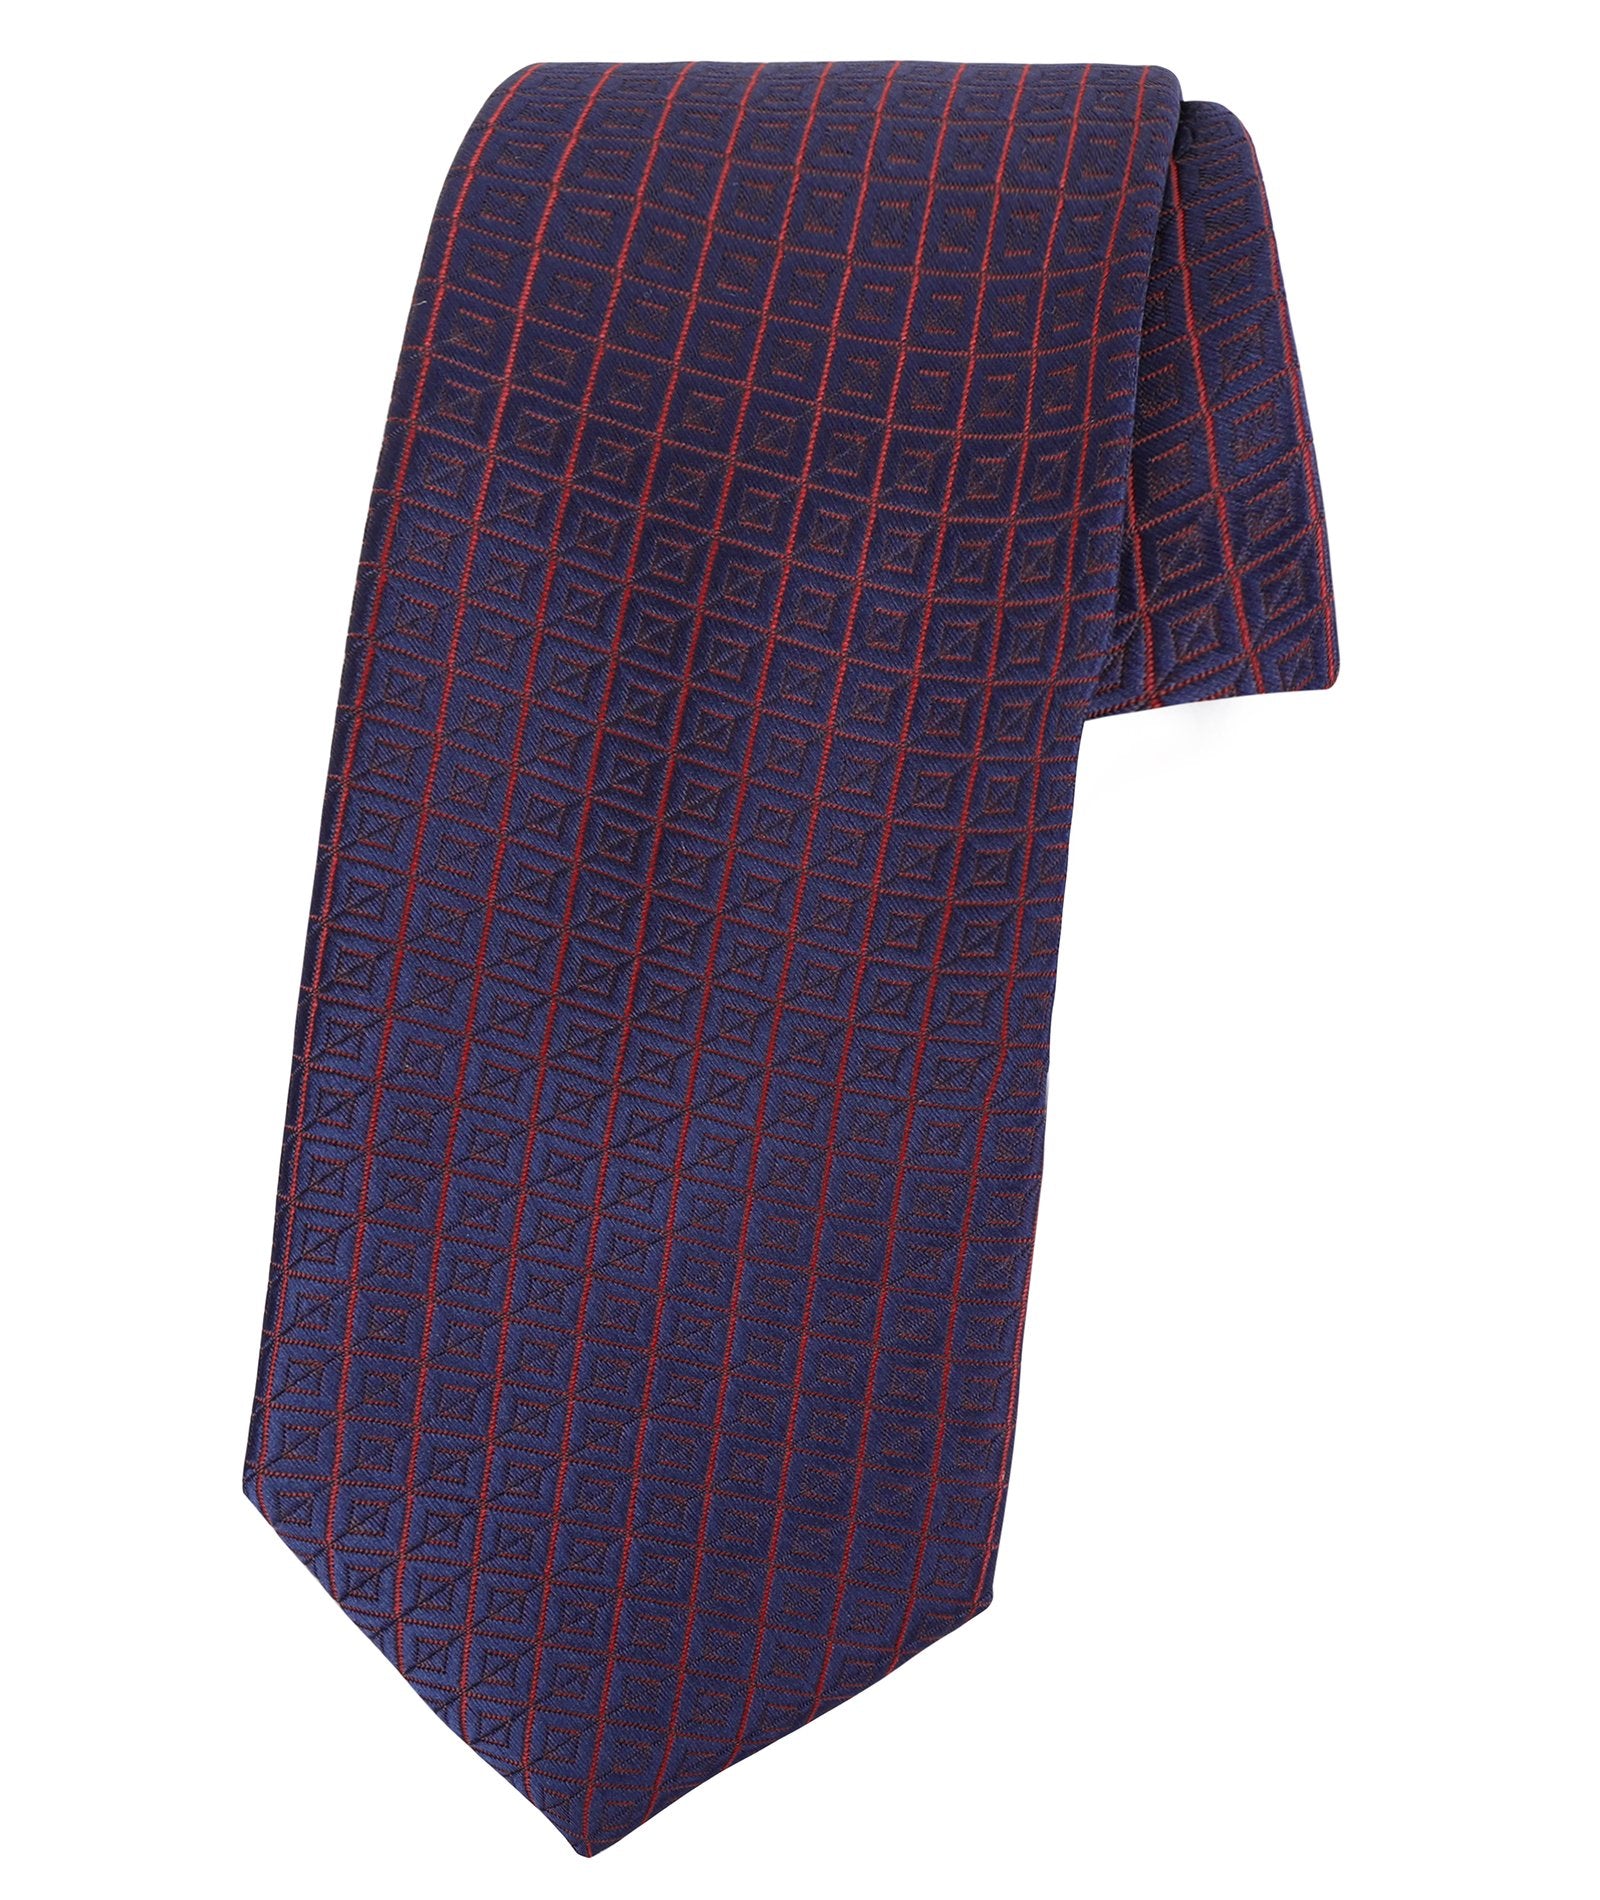 Blue and Red Googly Tie